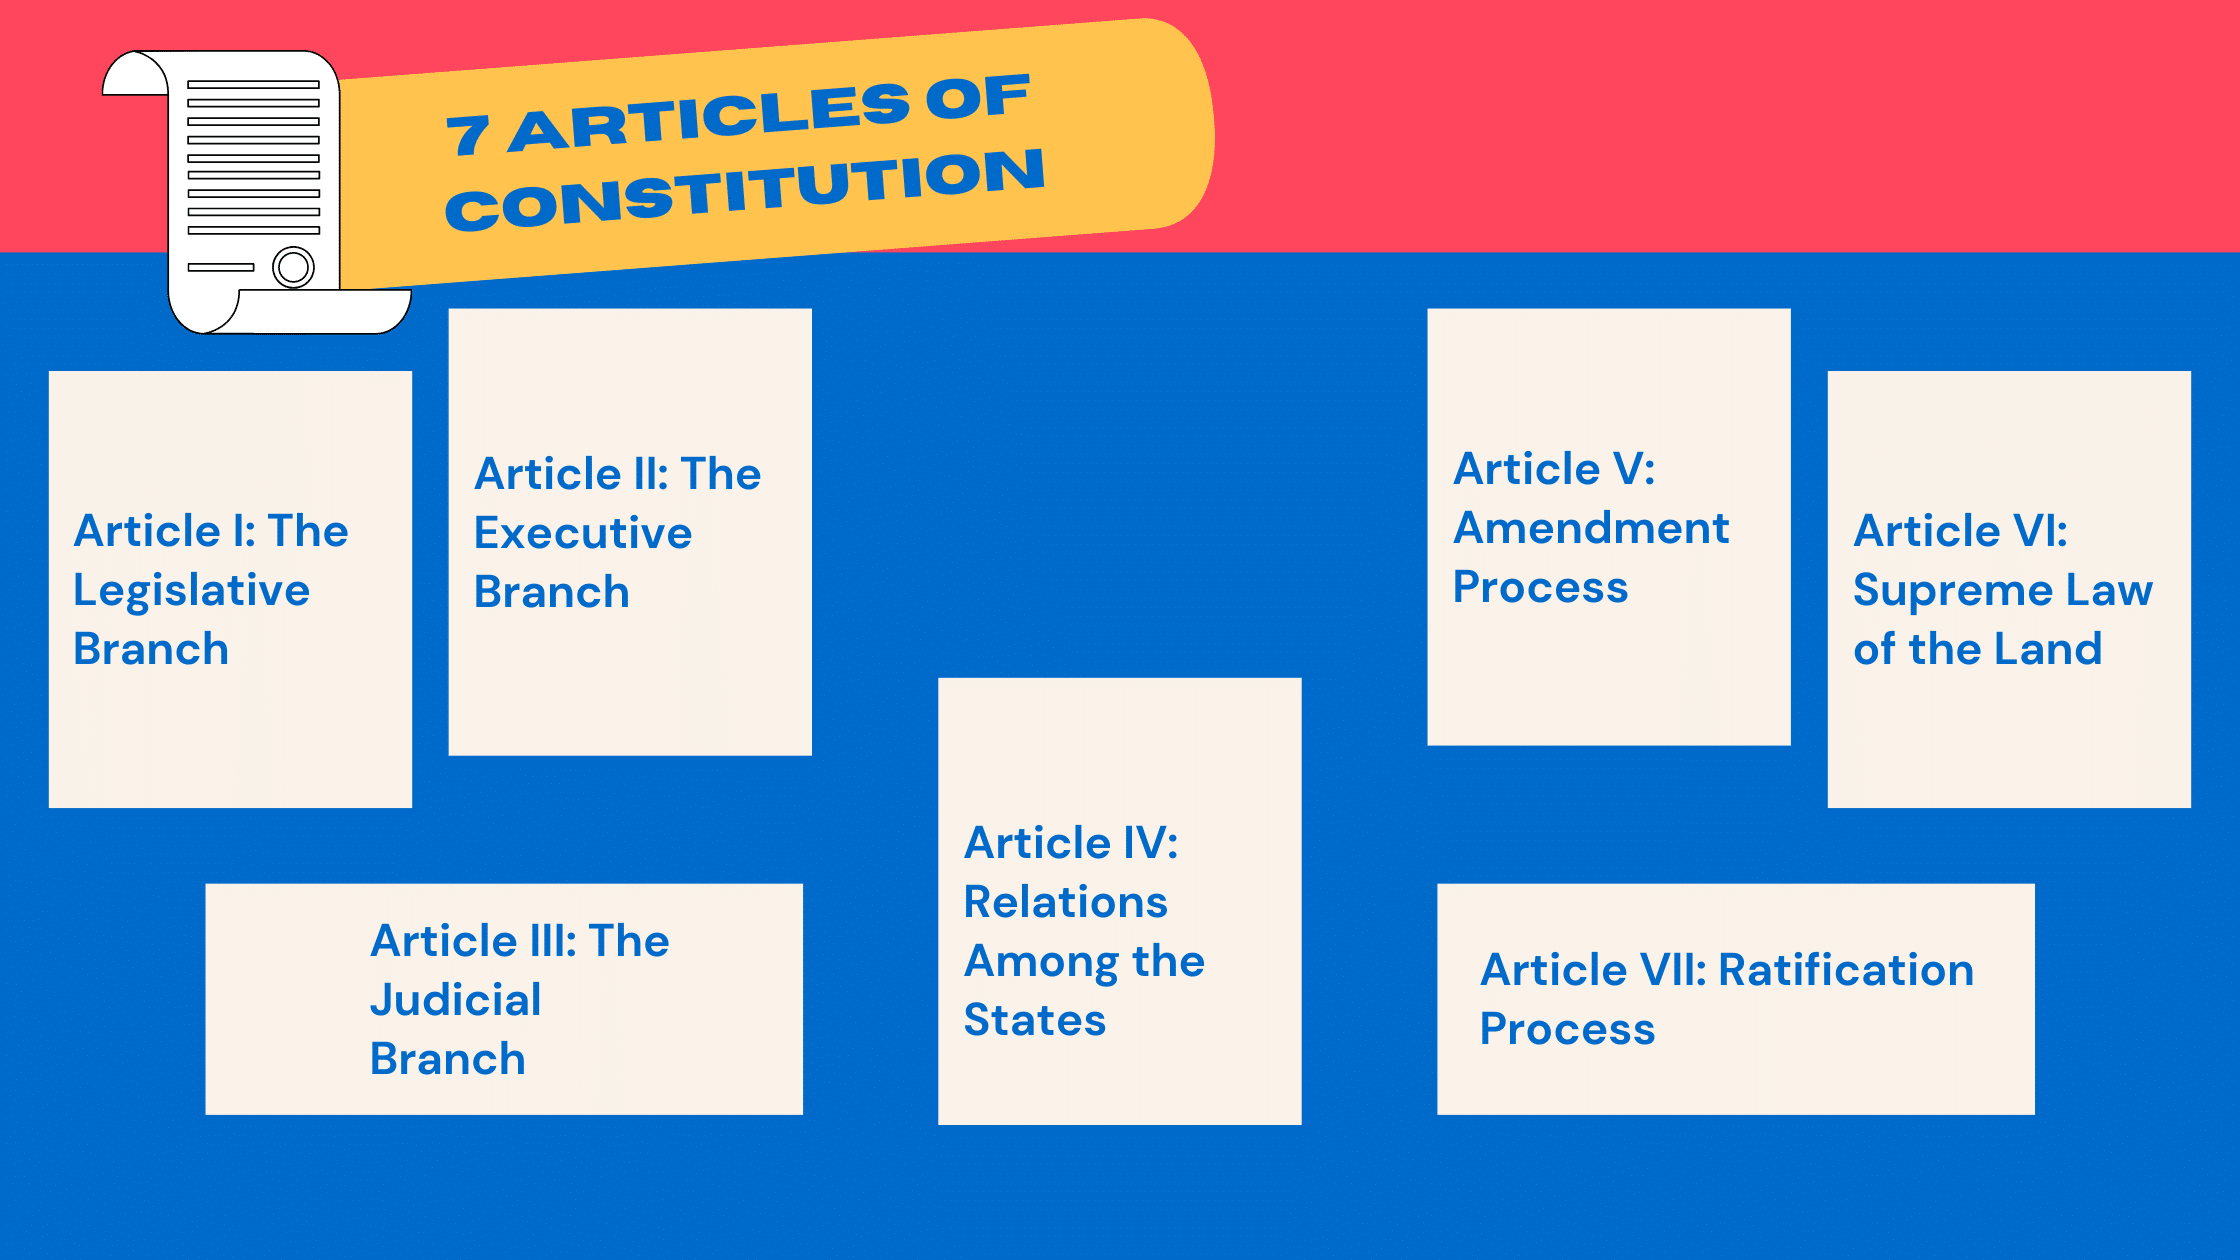 summary of the seven articles of the constitution chrestensen education